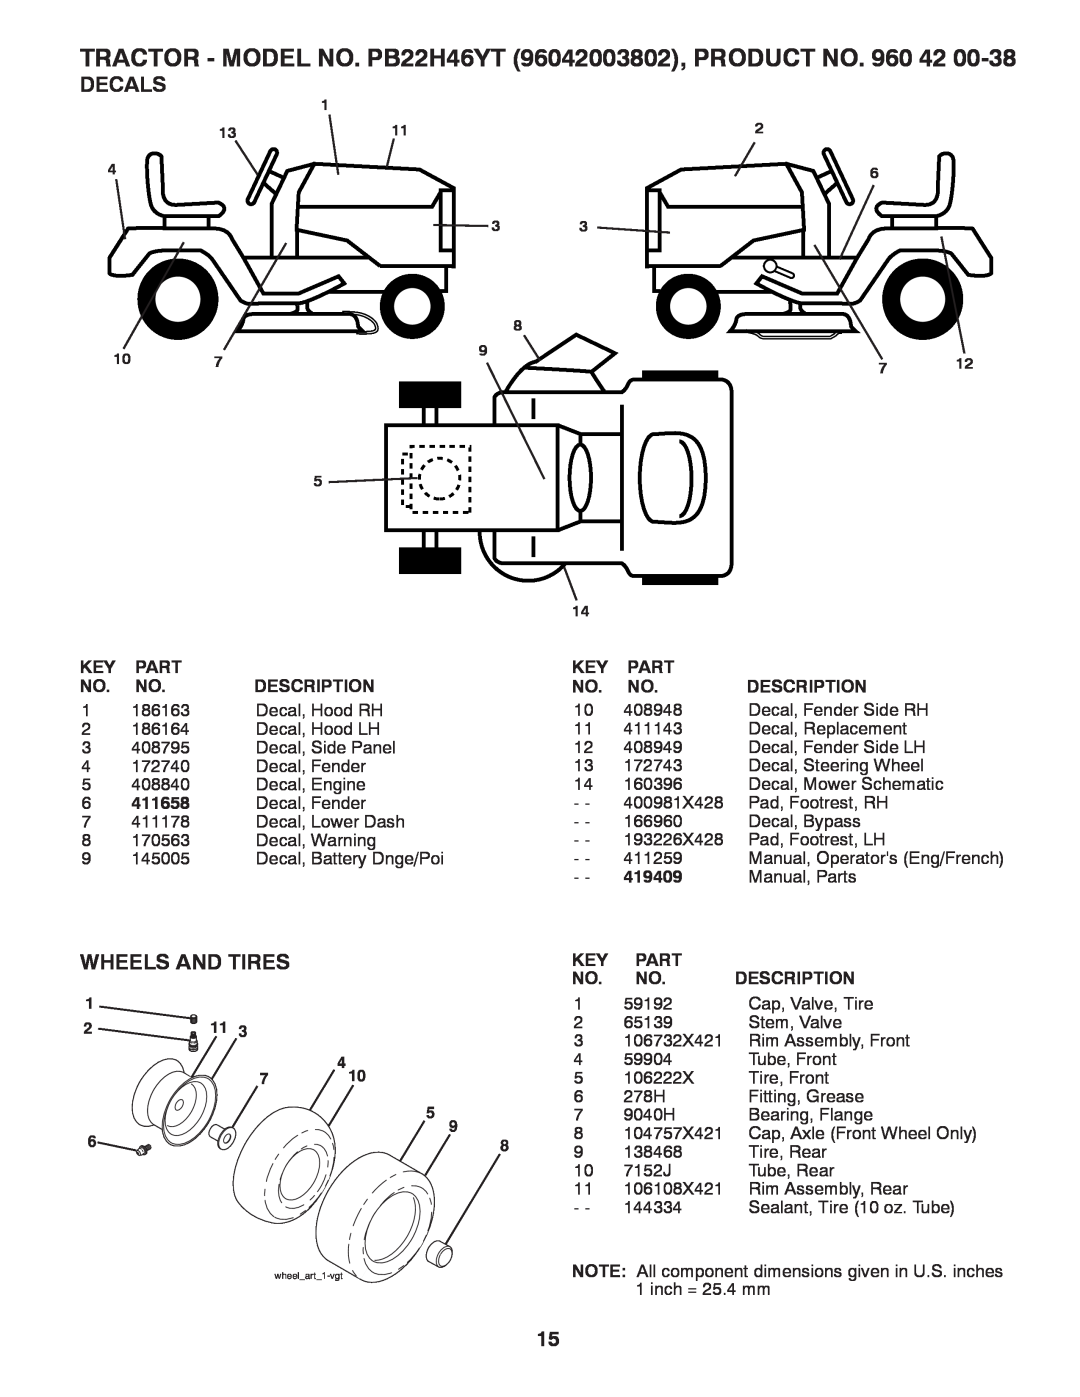 Poulan 960 42 00-38, 96042003802 manual Decals, Wheels And Tires 